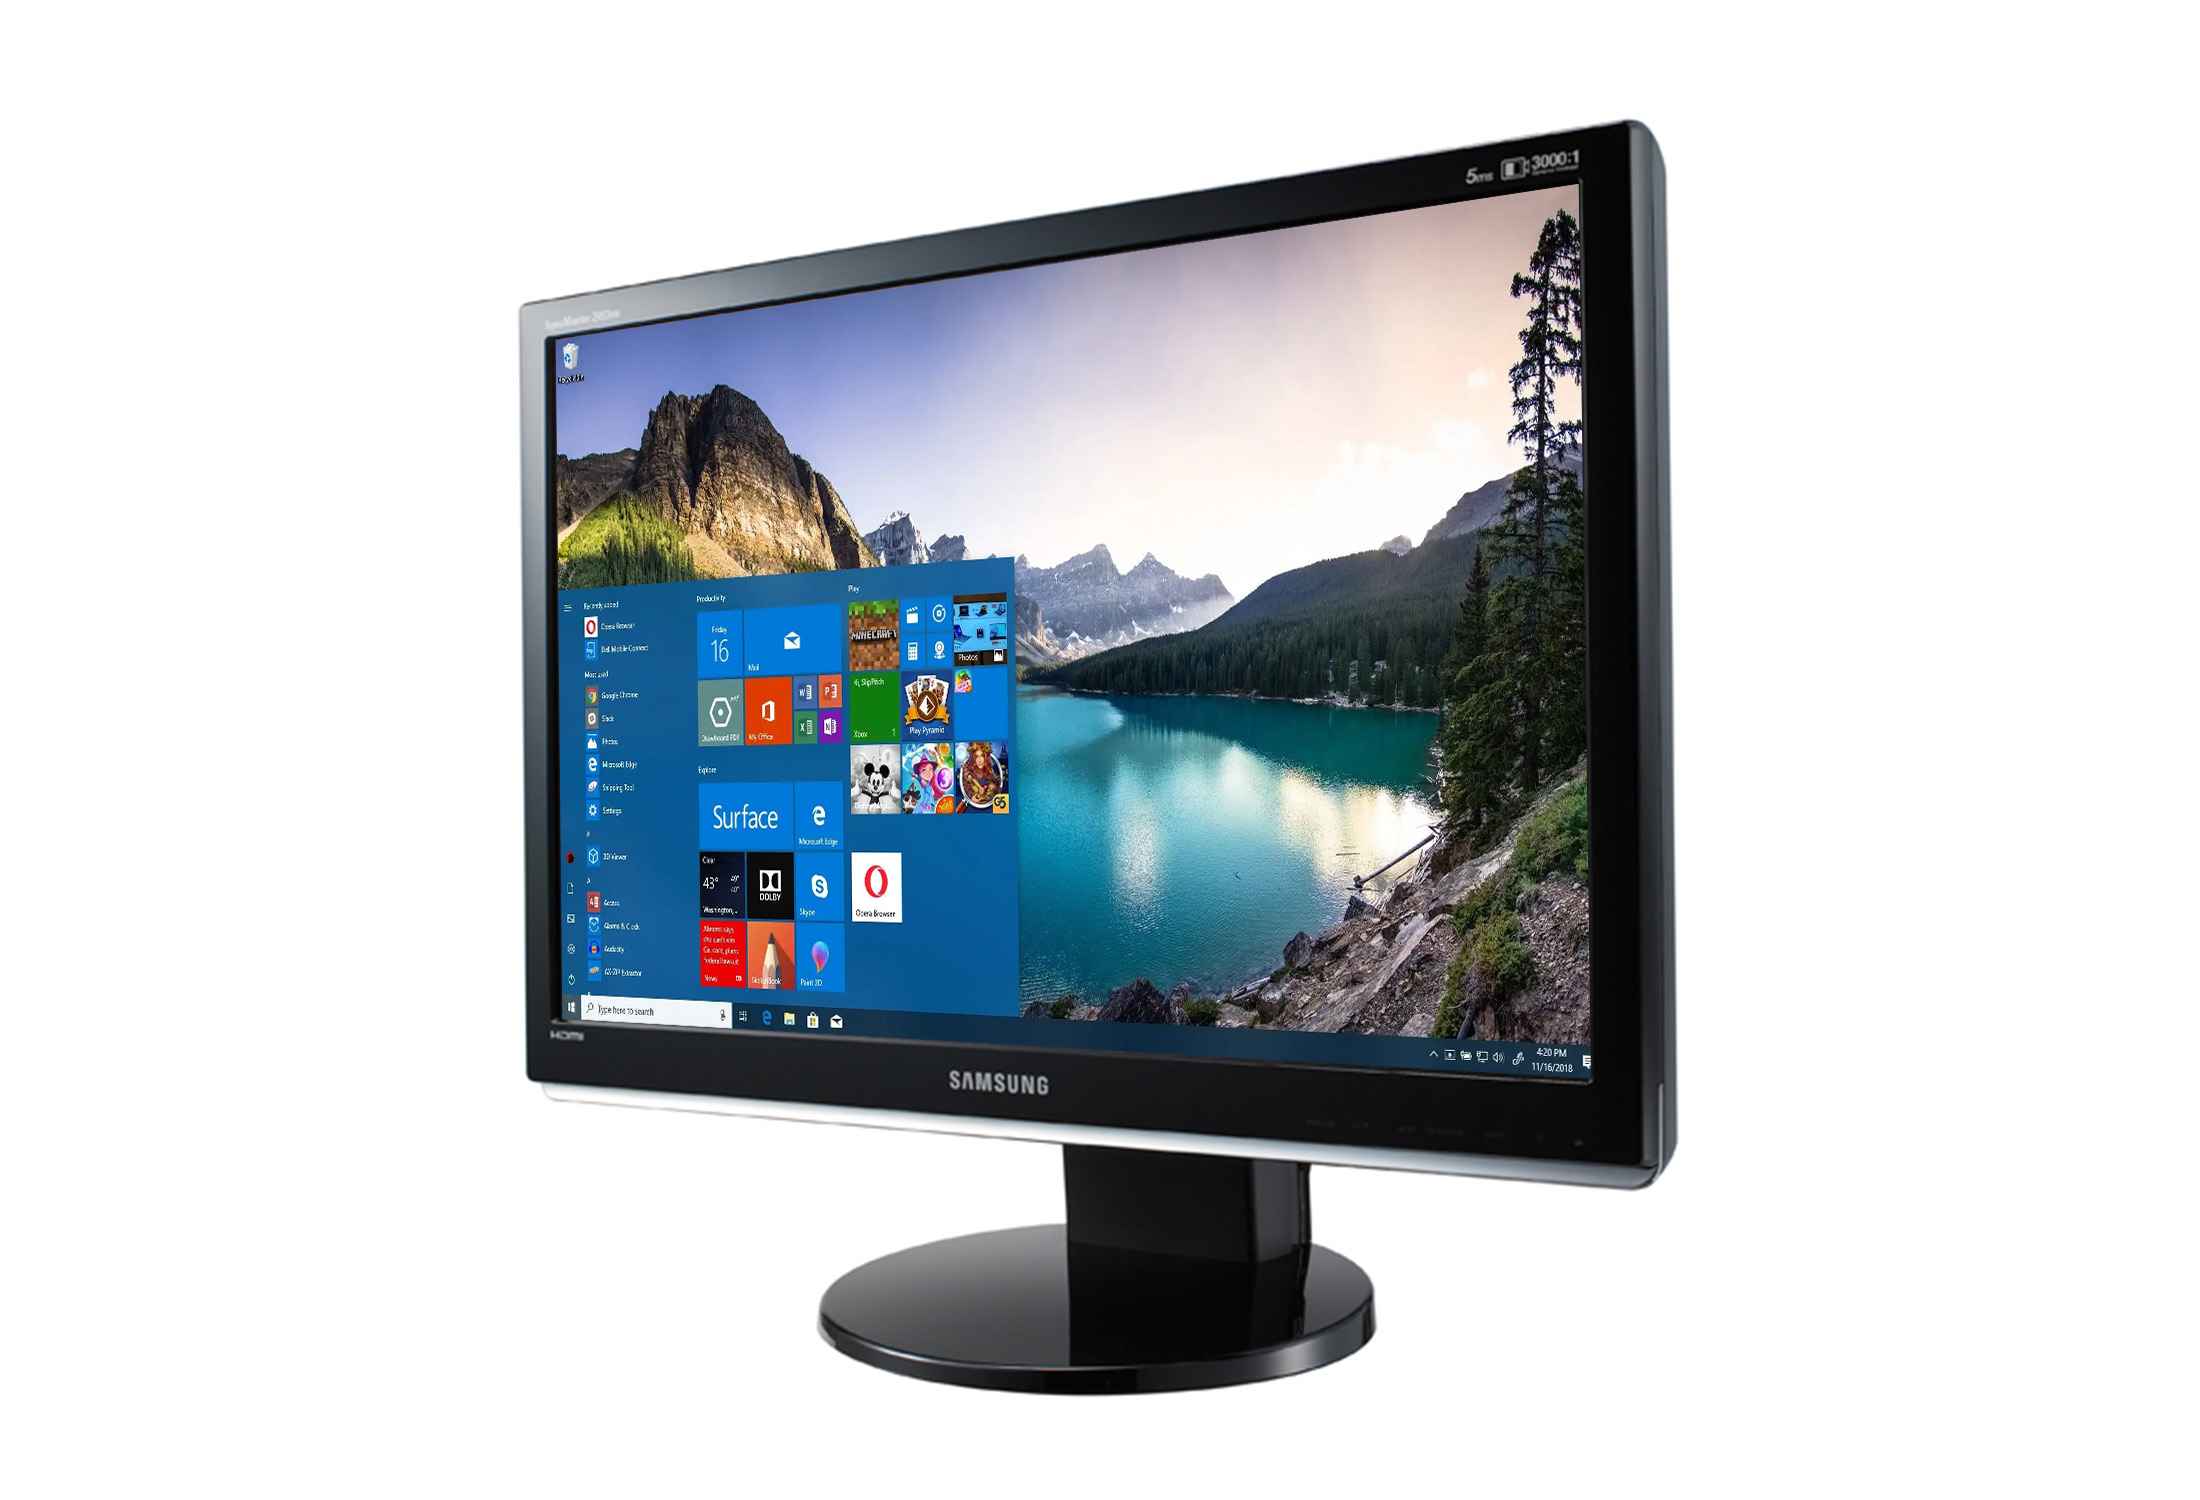 Samsung SyncMaster 2493HM 24-inch 1920x1200 HDMI-rxZij.jpeg